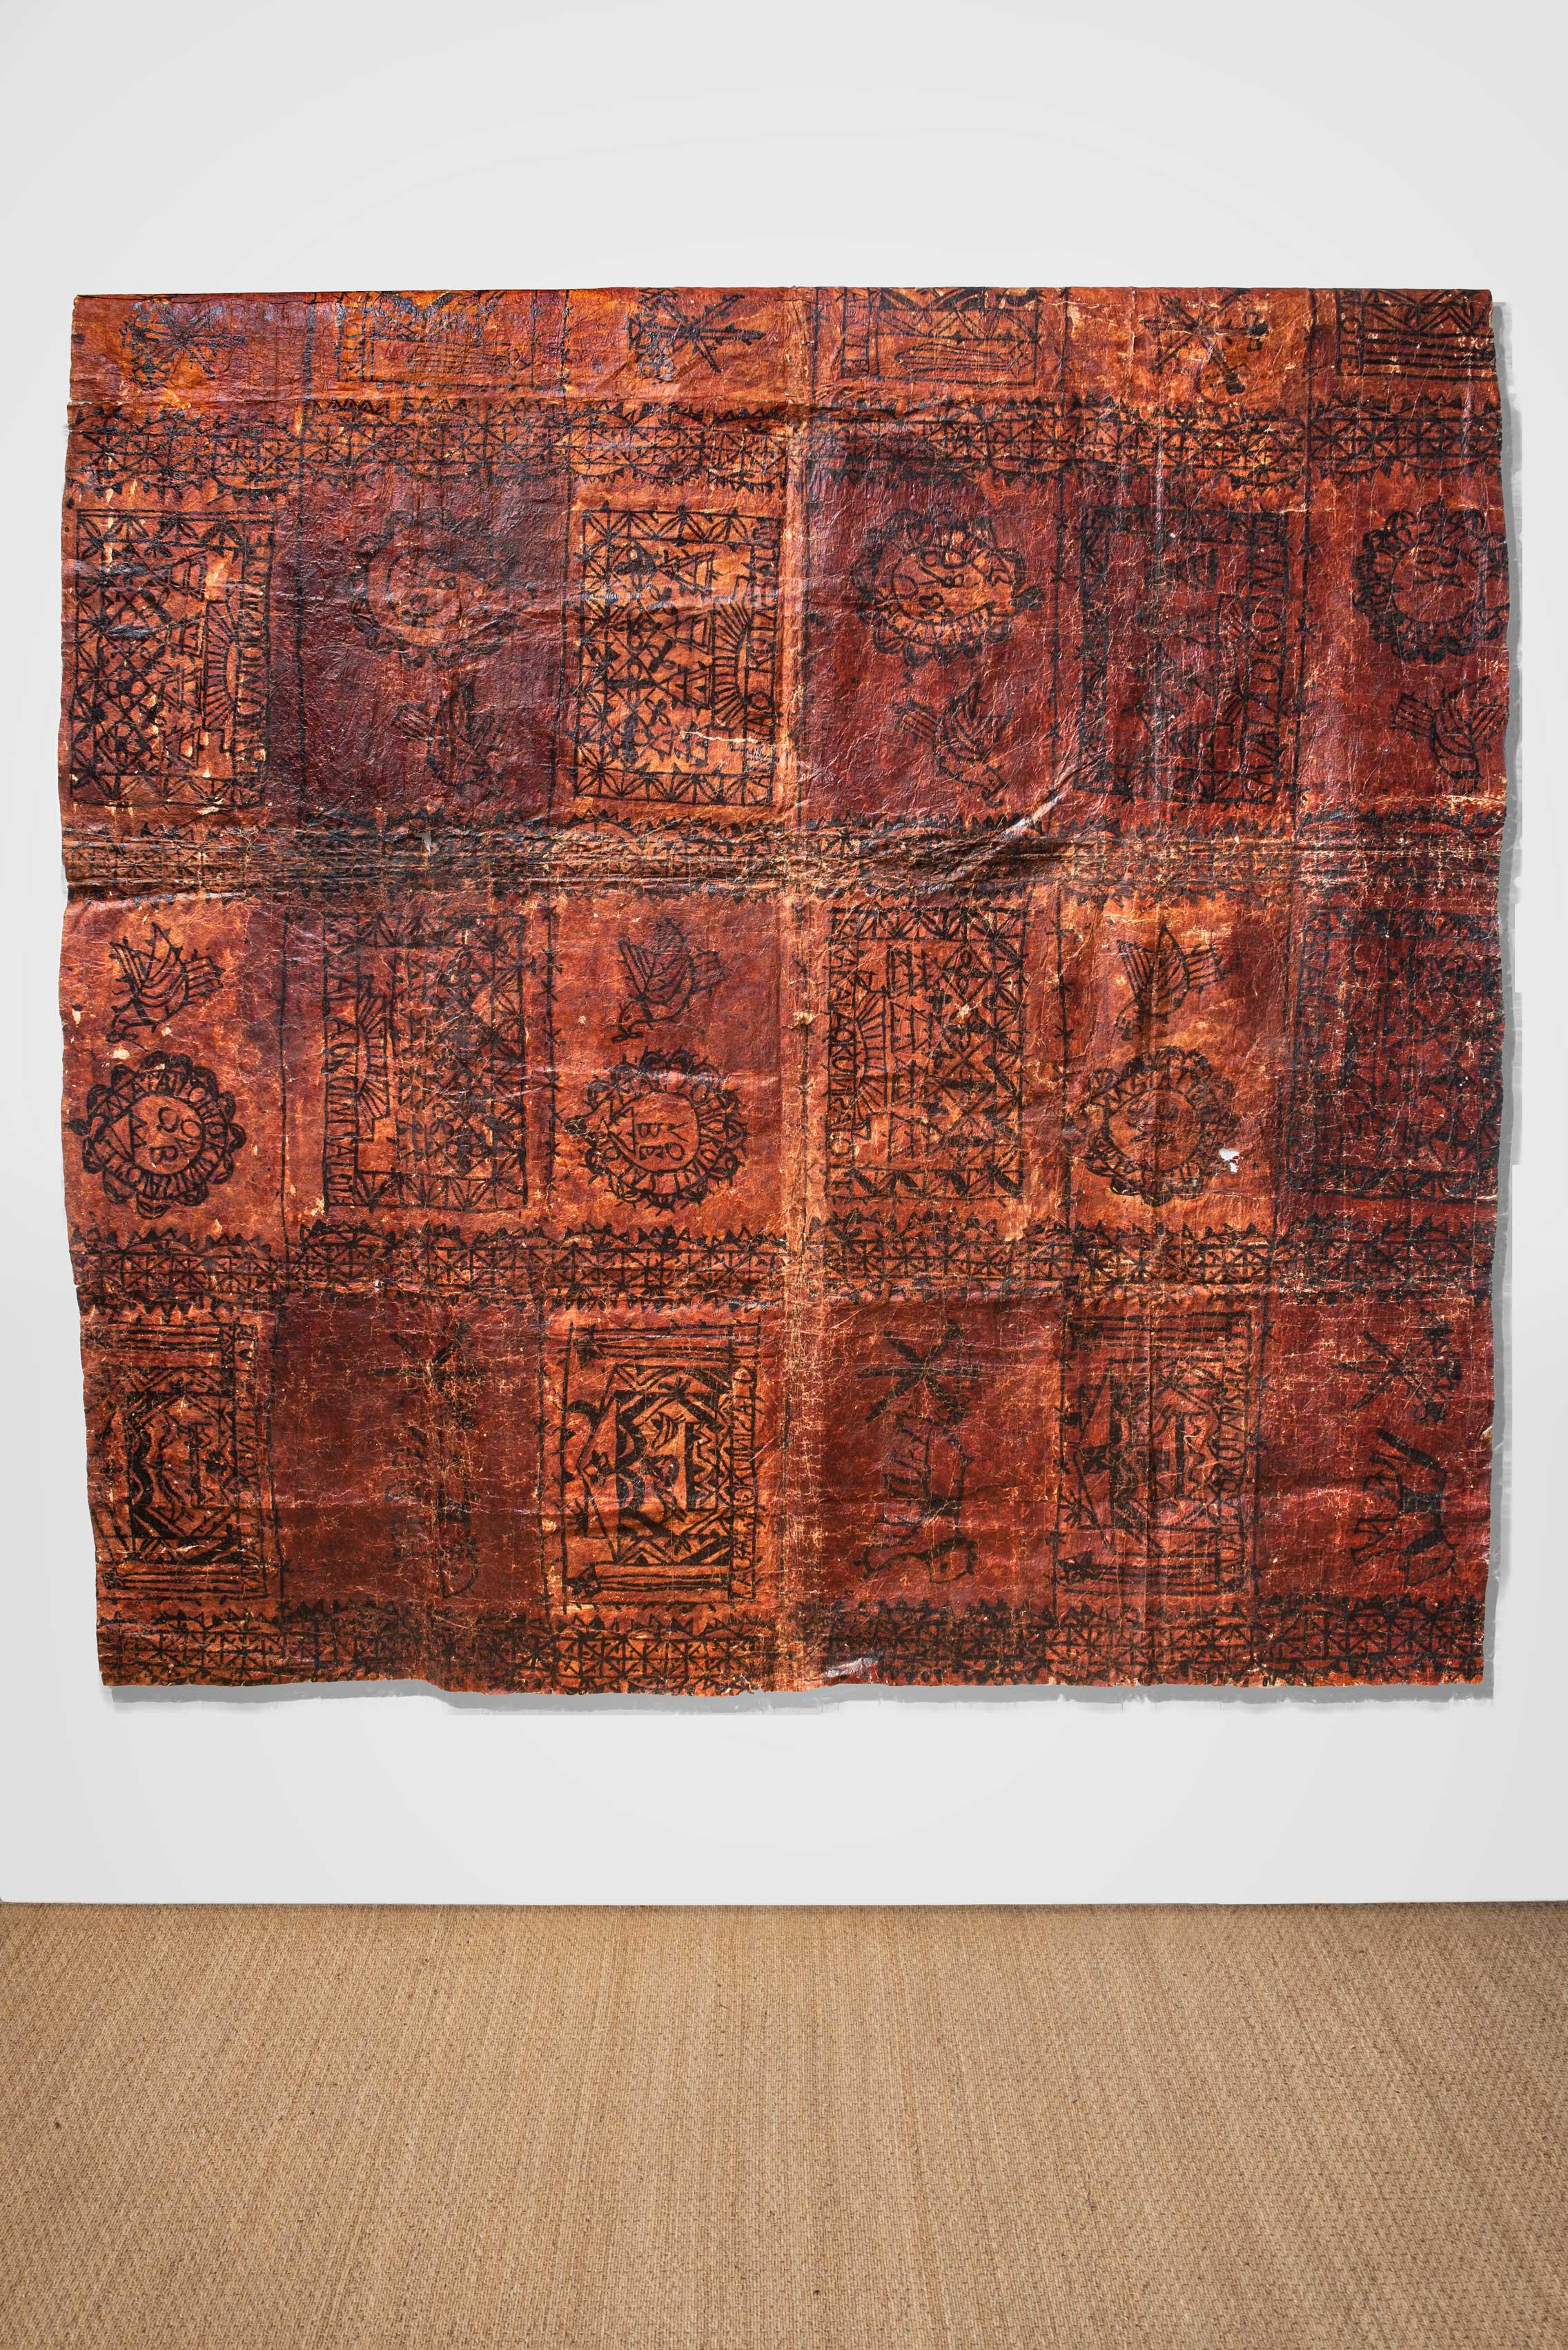 20th century Tahitian bark cloth wall hanging with bird + agrarian motifs, currently hung from aluminum mount, but could make a fantastic screen if mounted.